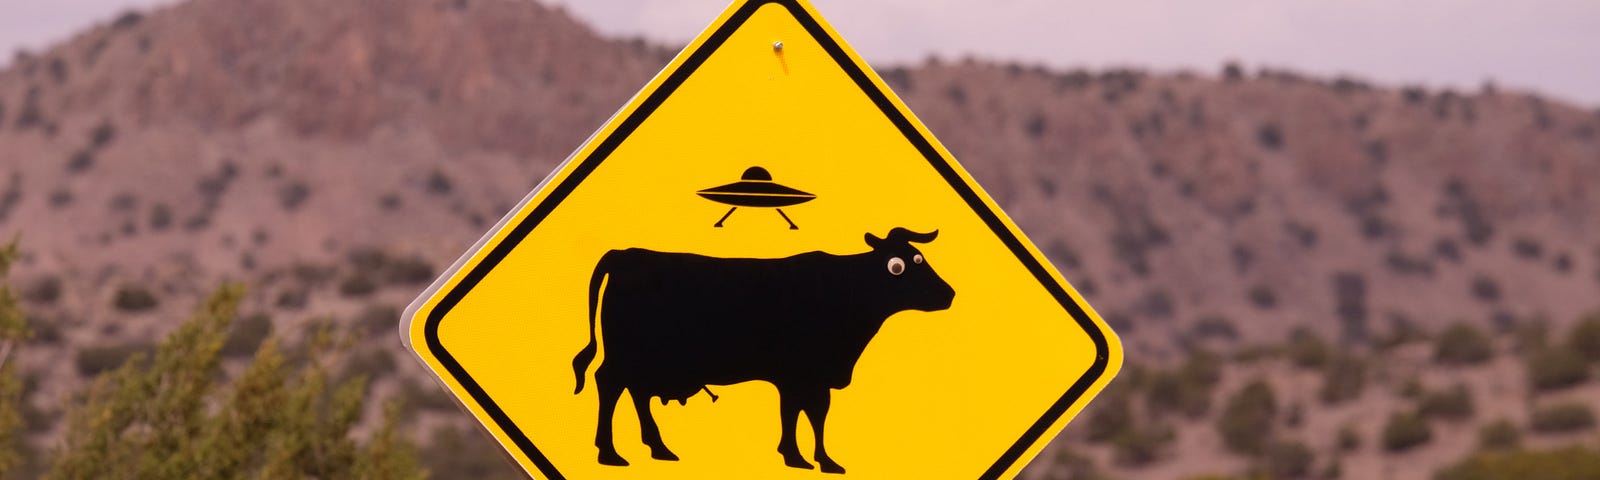 There is a dry mountain landscape with a bright yellow diamond road sign that has a UFO over a cow with googly eyes stuck to it